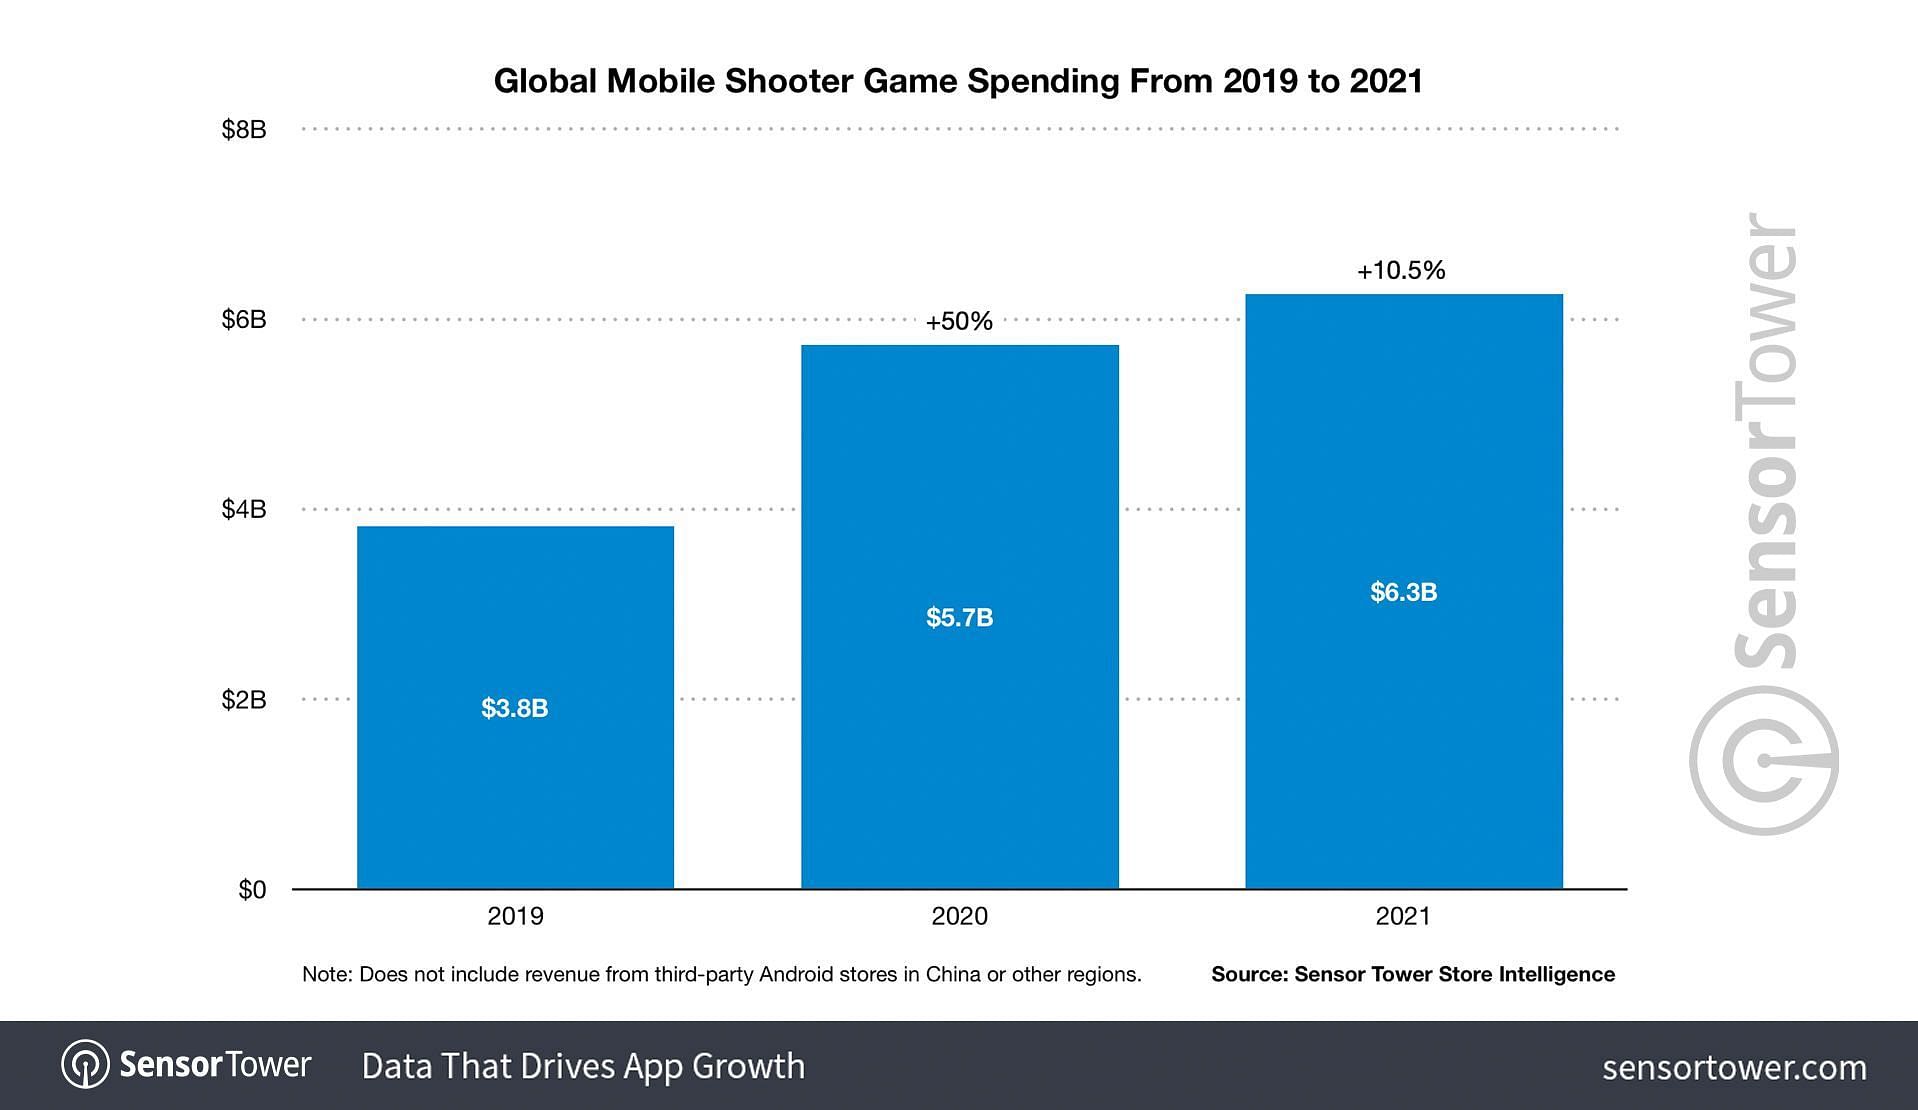 Global mobile shooter game spending from 2019 to 2021 (Image via Sensor Tower)